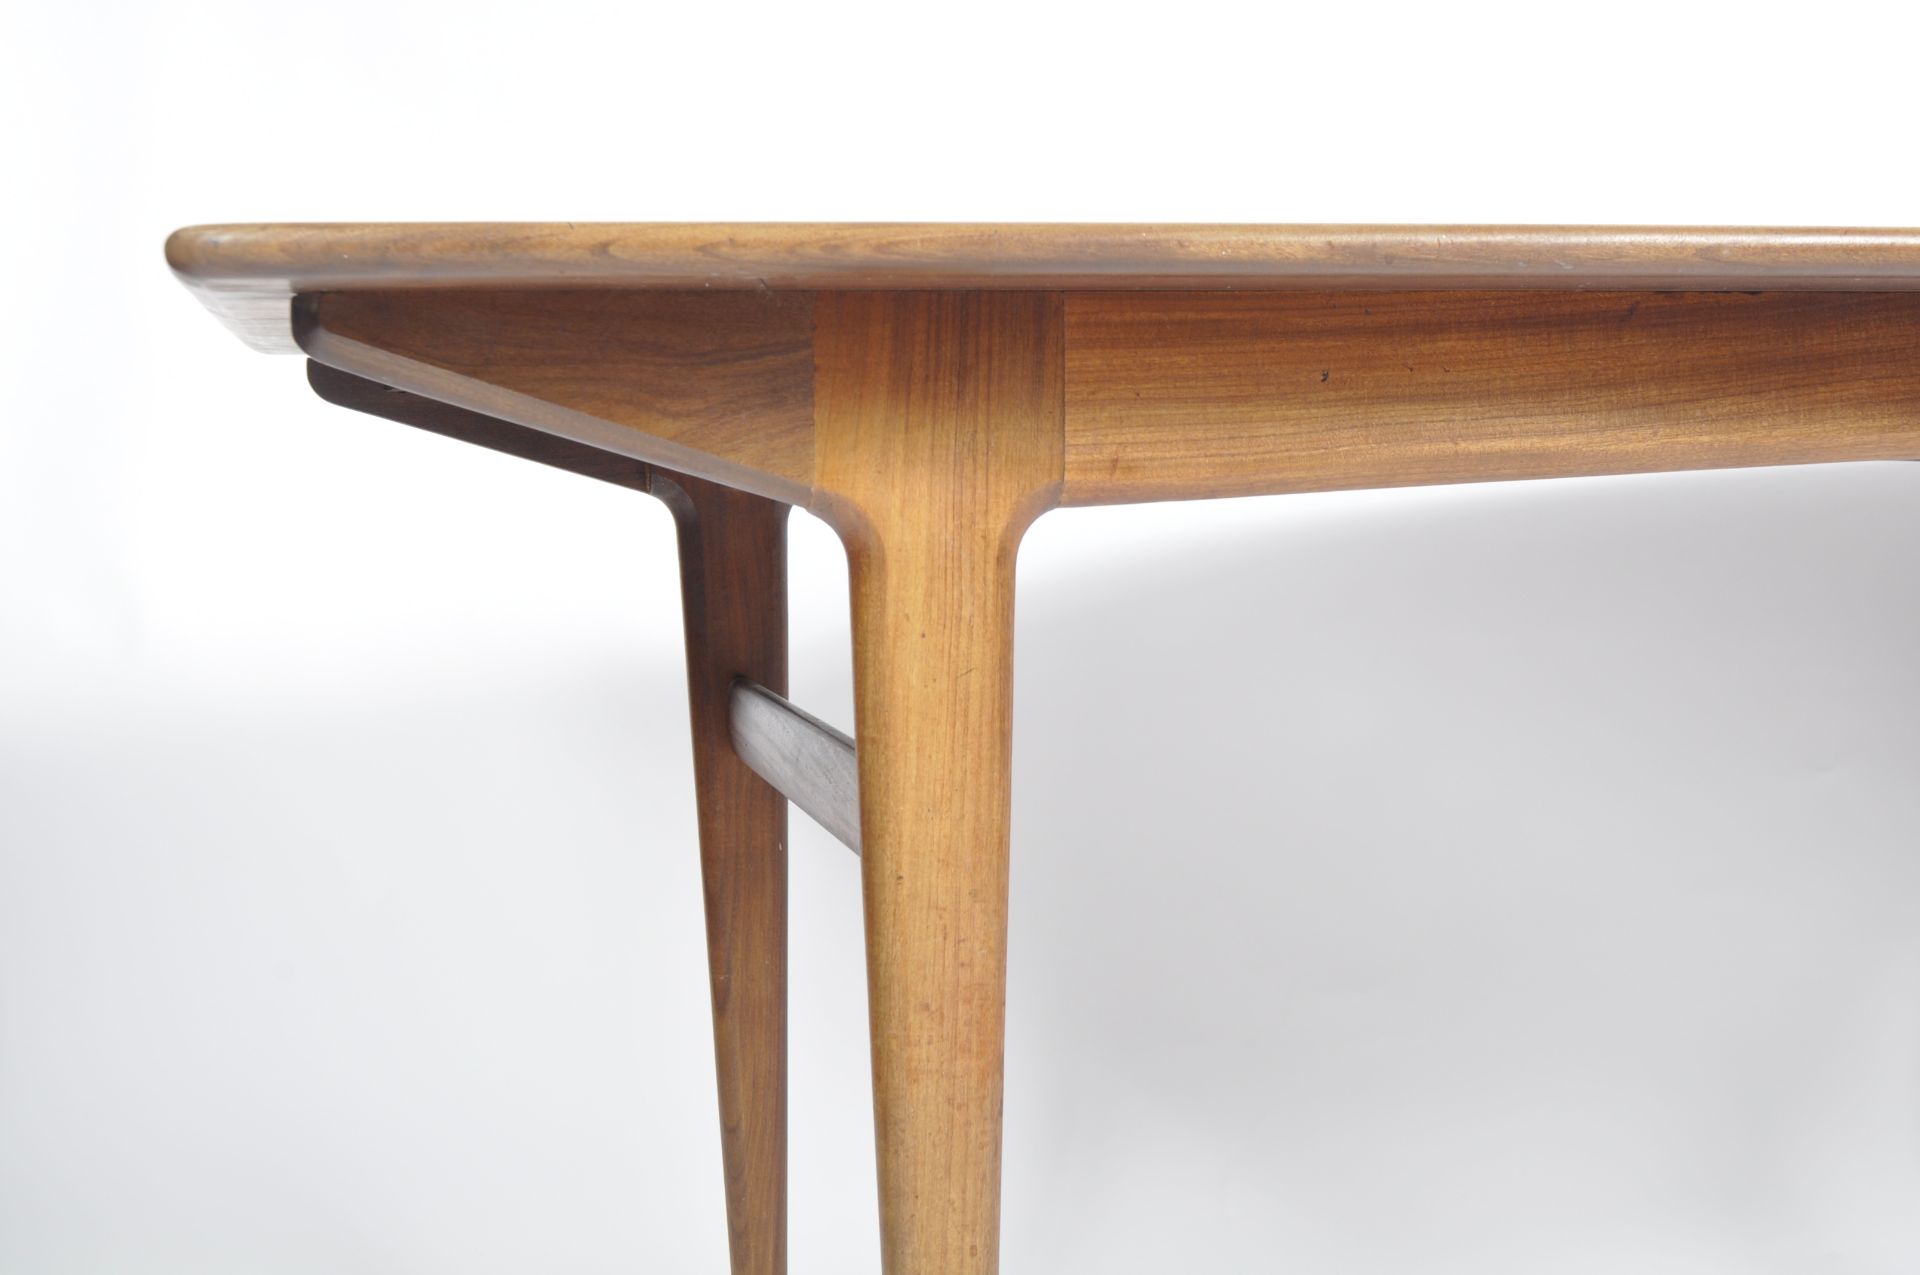 YOUNGER TEAK WOOD DINING TABLE AND FOUR CHAIRS - Image 8 of 8